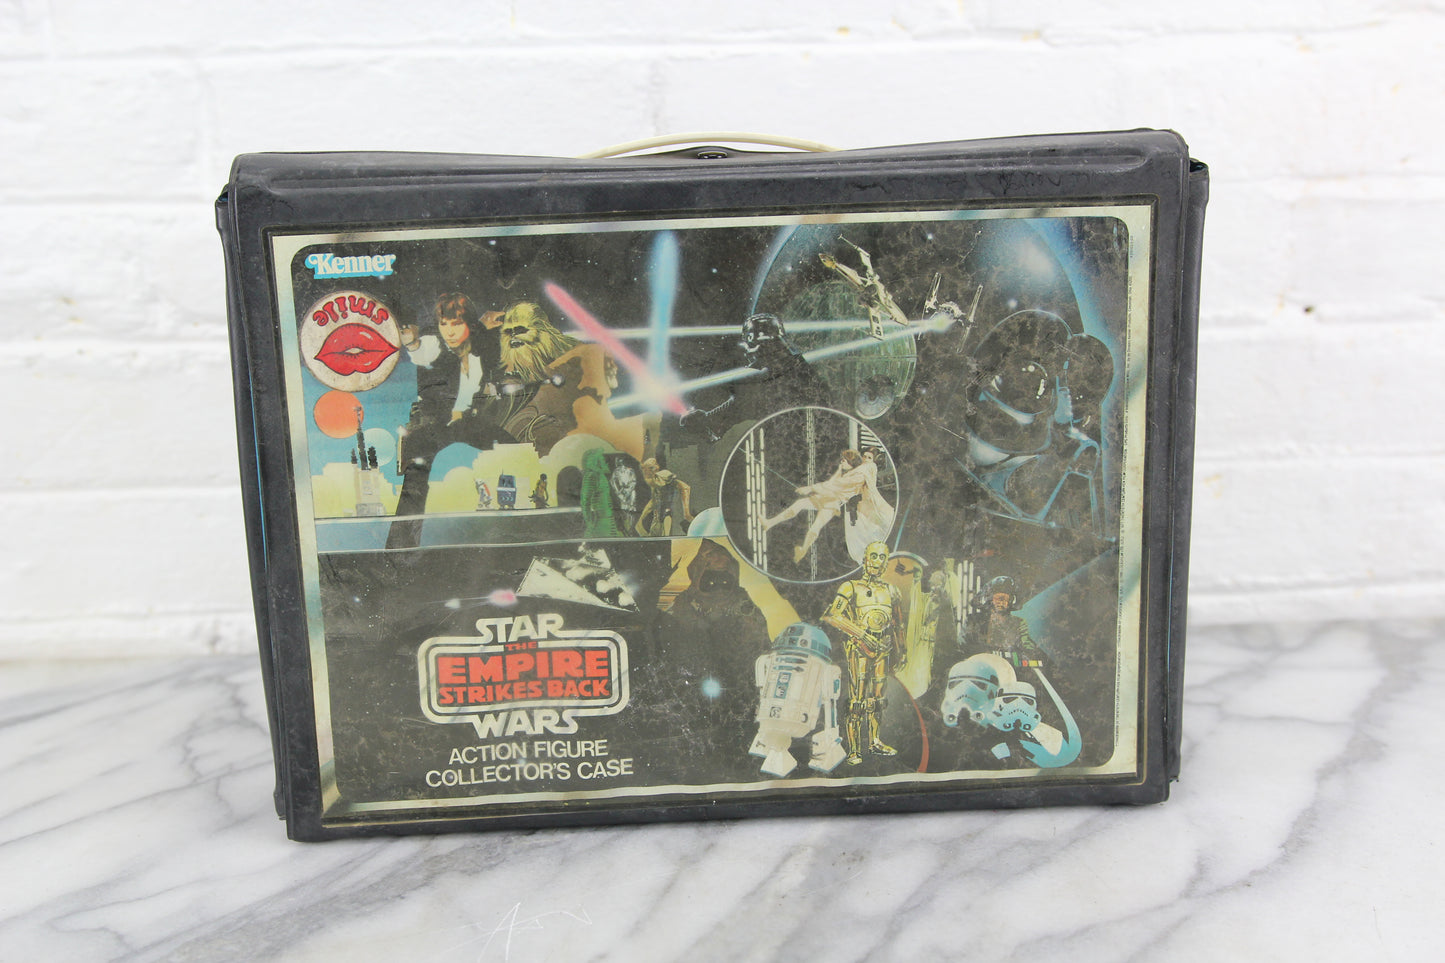 Star Wars The Empire Strikes Back Action Figure Collector's Case by Kenner, 1980